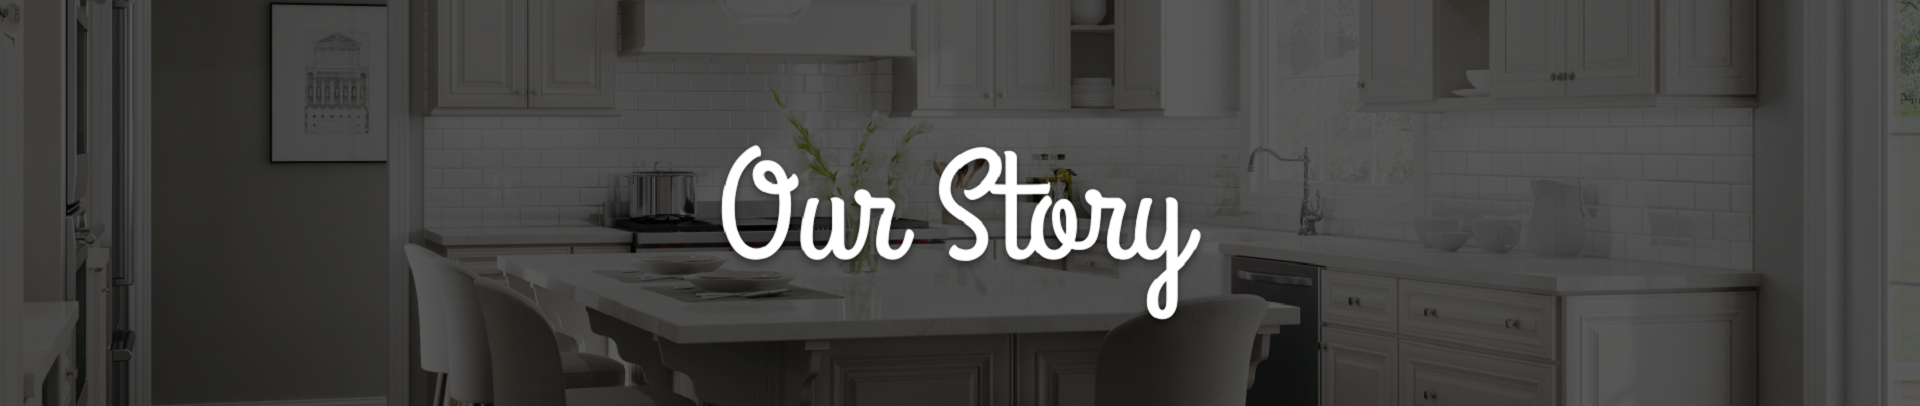 Our Story Banner Midlothian - RVA Cabinetry